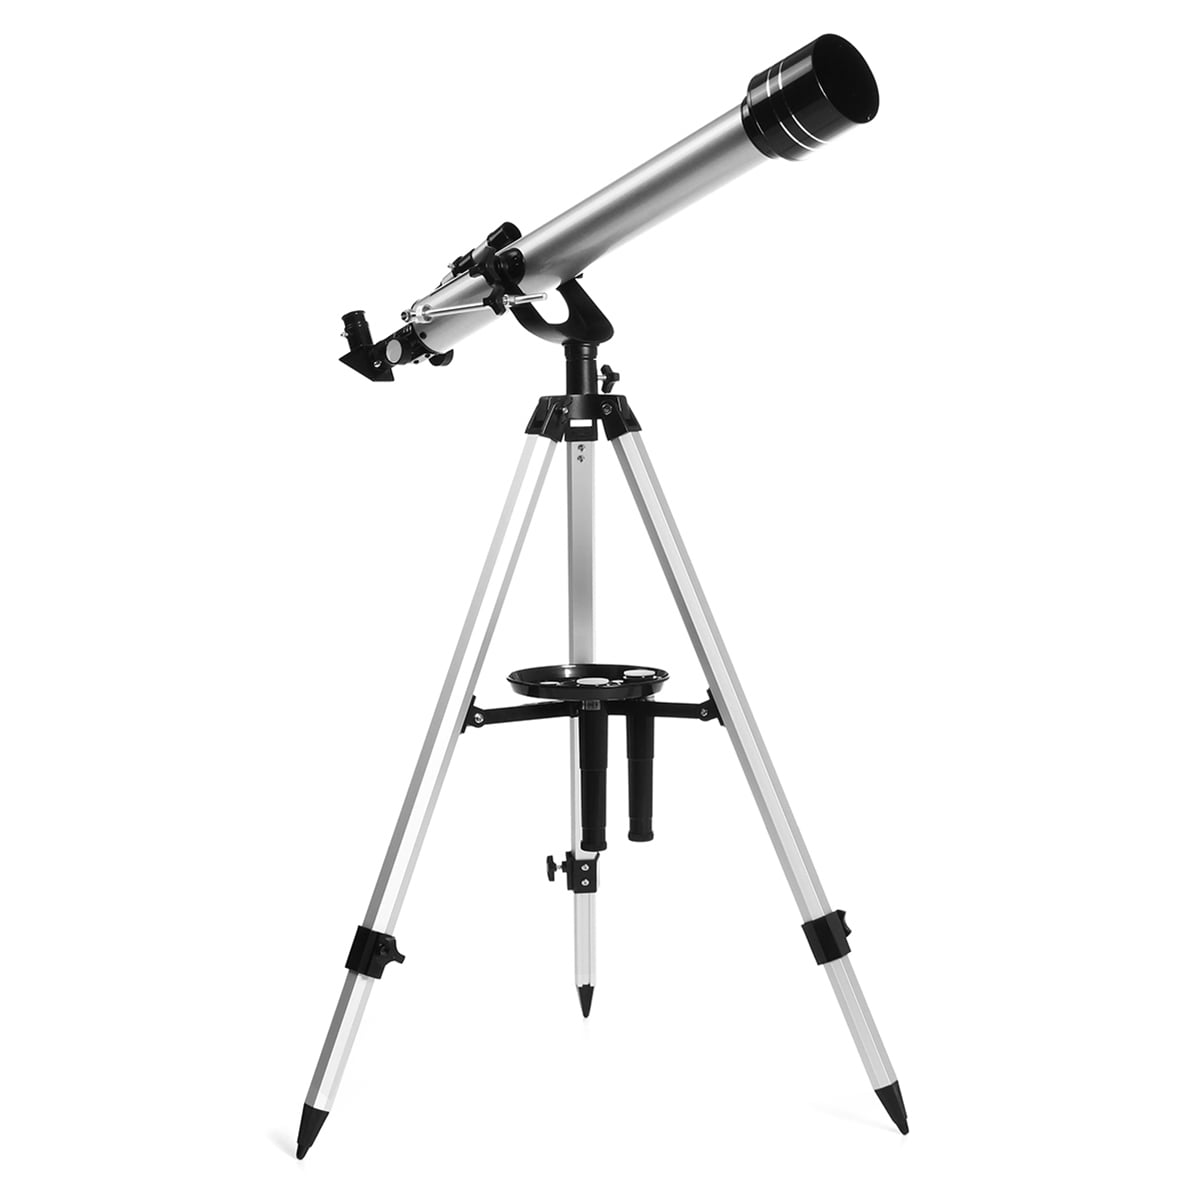 Kids Beginners Stars Telescopes for Adults Astronomy Professional Astronomical Telescope Refractor Tripod Finder Science Education Travel Telescope Moon Great to Explore Space Yellow 